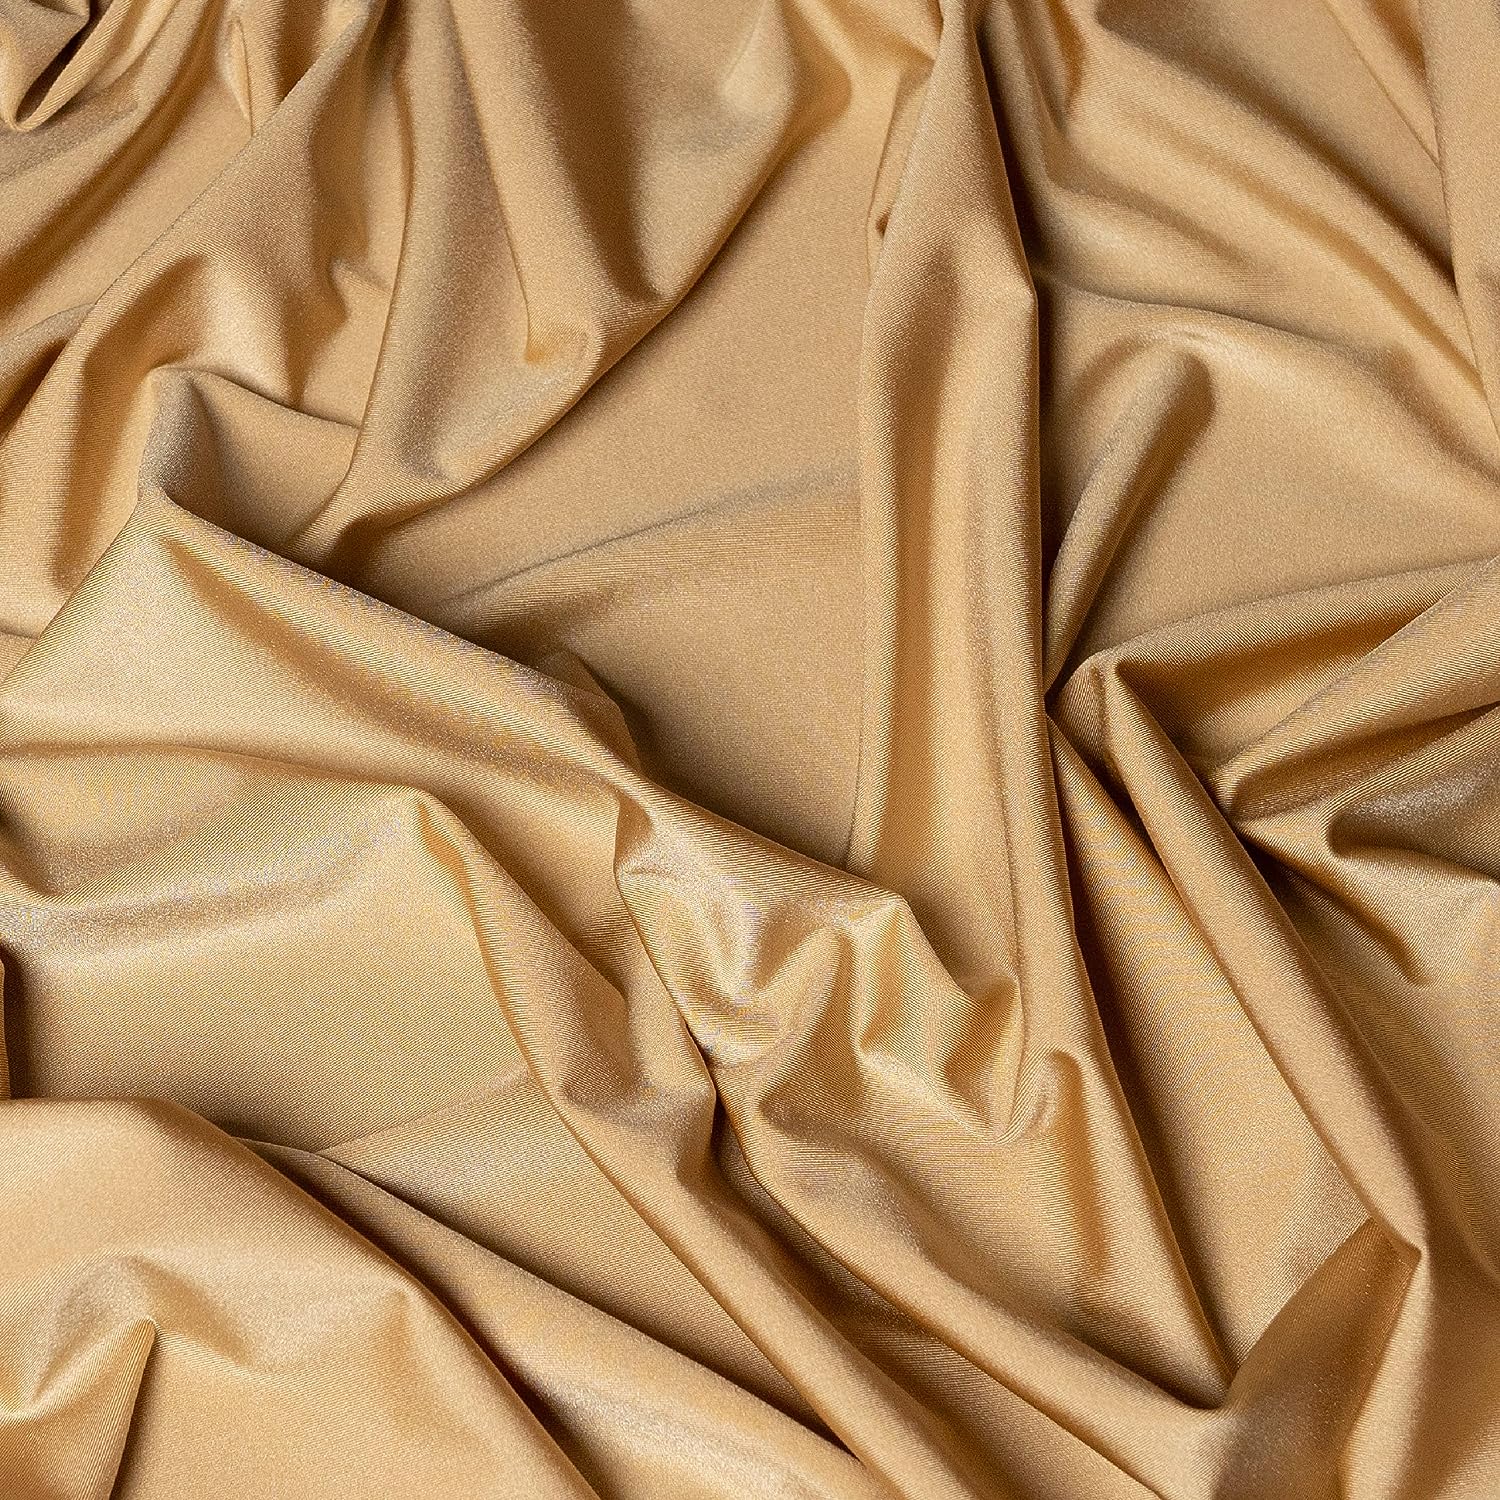 Nude Luxury Nylon Spandex Fabric By The YardICE FABRICSICE FABRICSBy The Yard (58" Width)Nude Luxury Nylon Spandex Fabric By The Yard ICE FABRICS